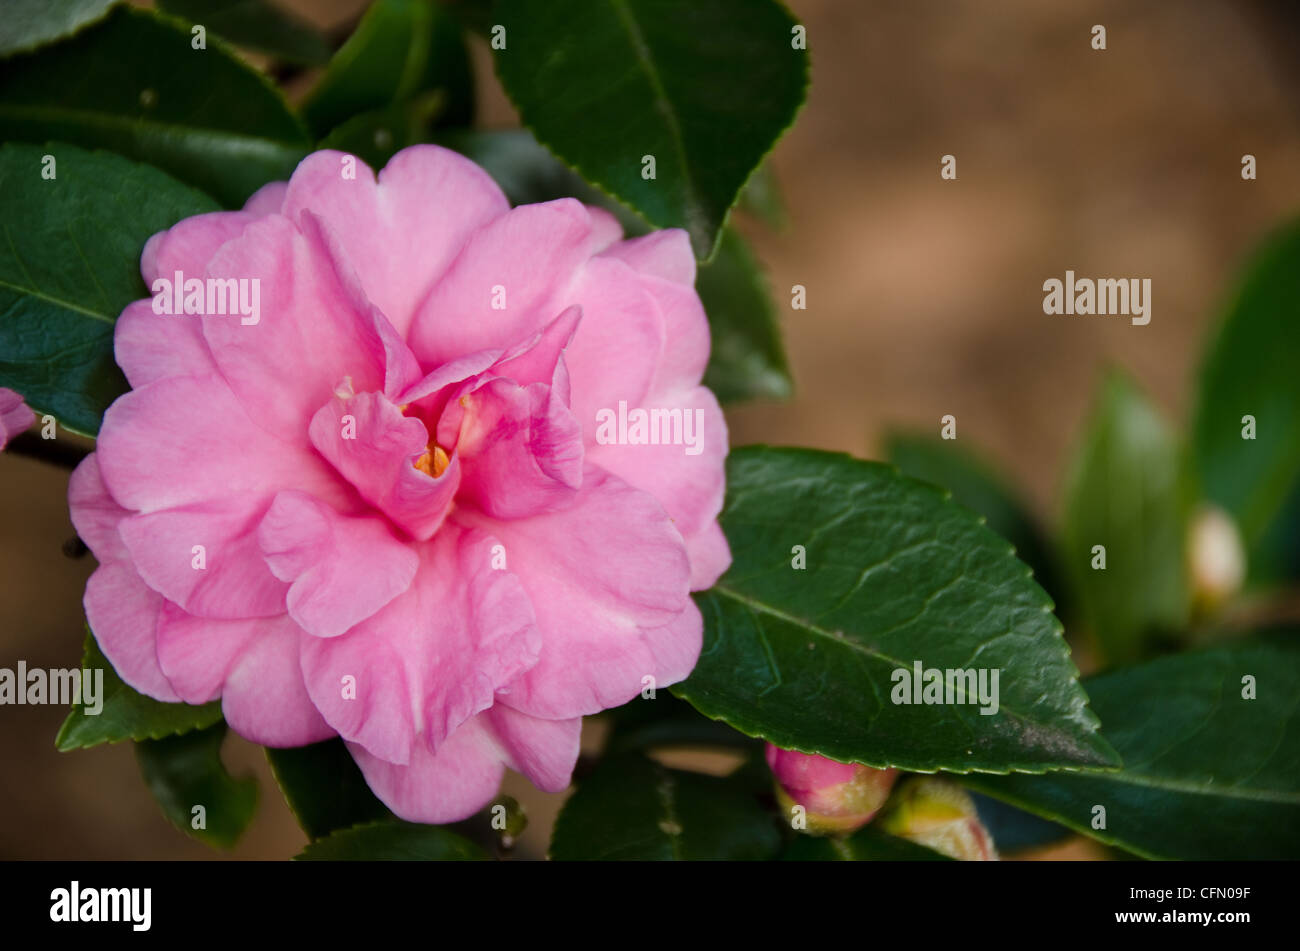 Pink flower of Japanese Camellia, Camellia japonica in sunlight Stock Photo